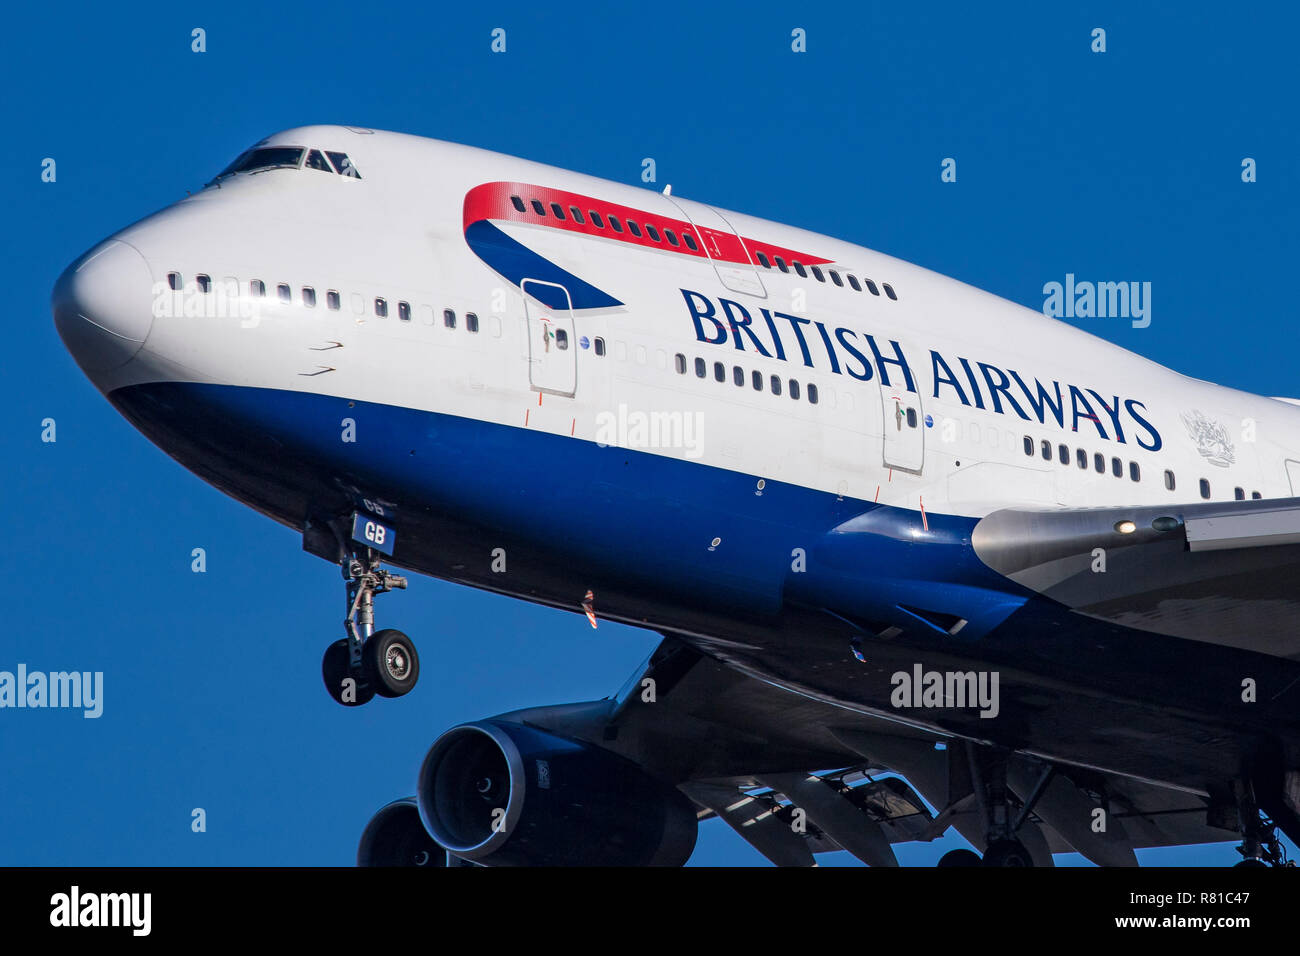 British Airways Boeing 747 Jumbo Jet seen landing at the London Heathrow  Airport LHR / EGLL in England. The aircraft is a Boeing 747-400 with  registration G-BYGB, it is equipped with 4